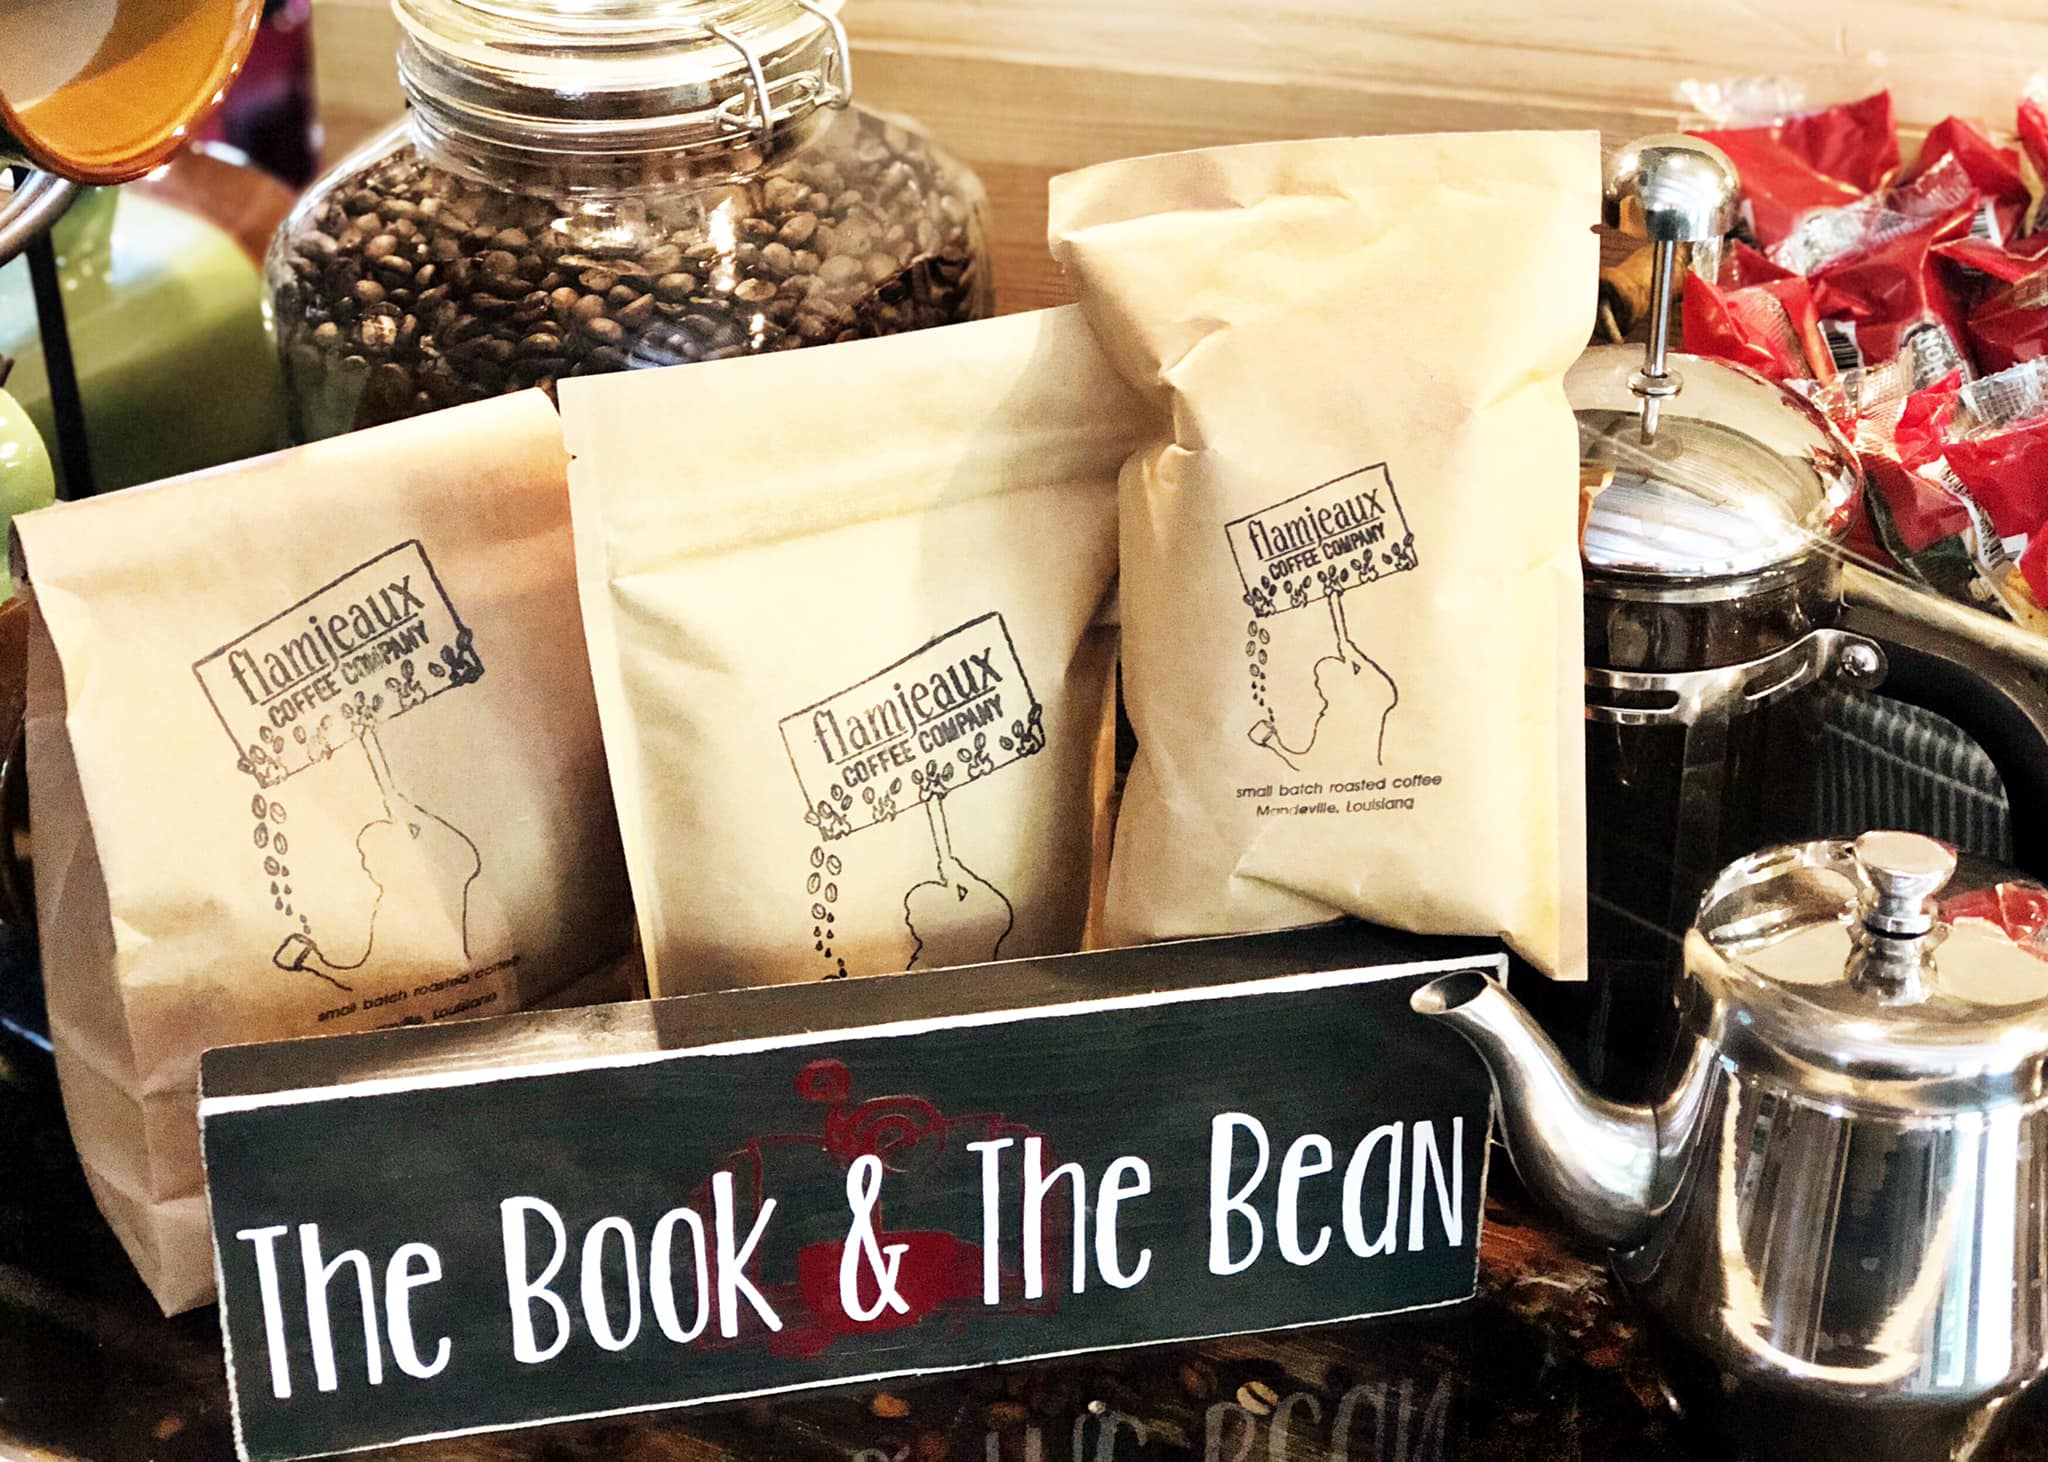 The Book & The Bean Coffees by Flamjeaux Coffee Roasters ...